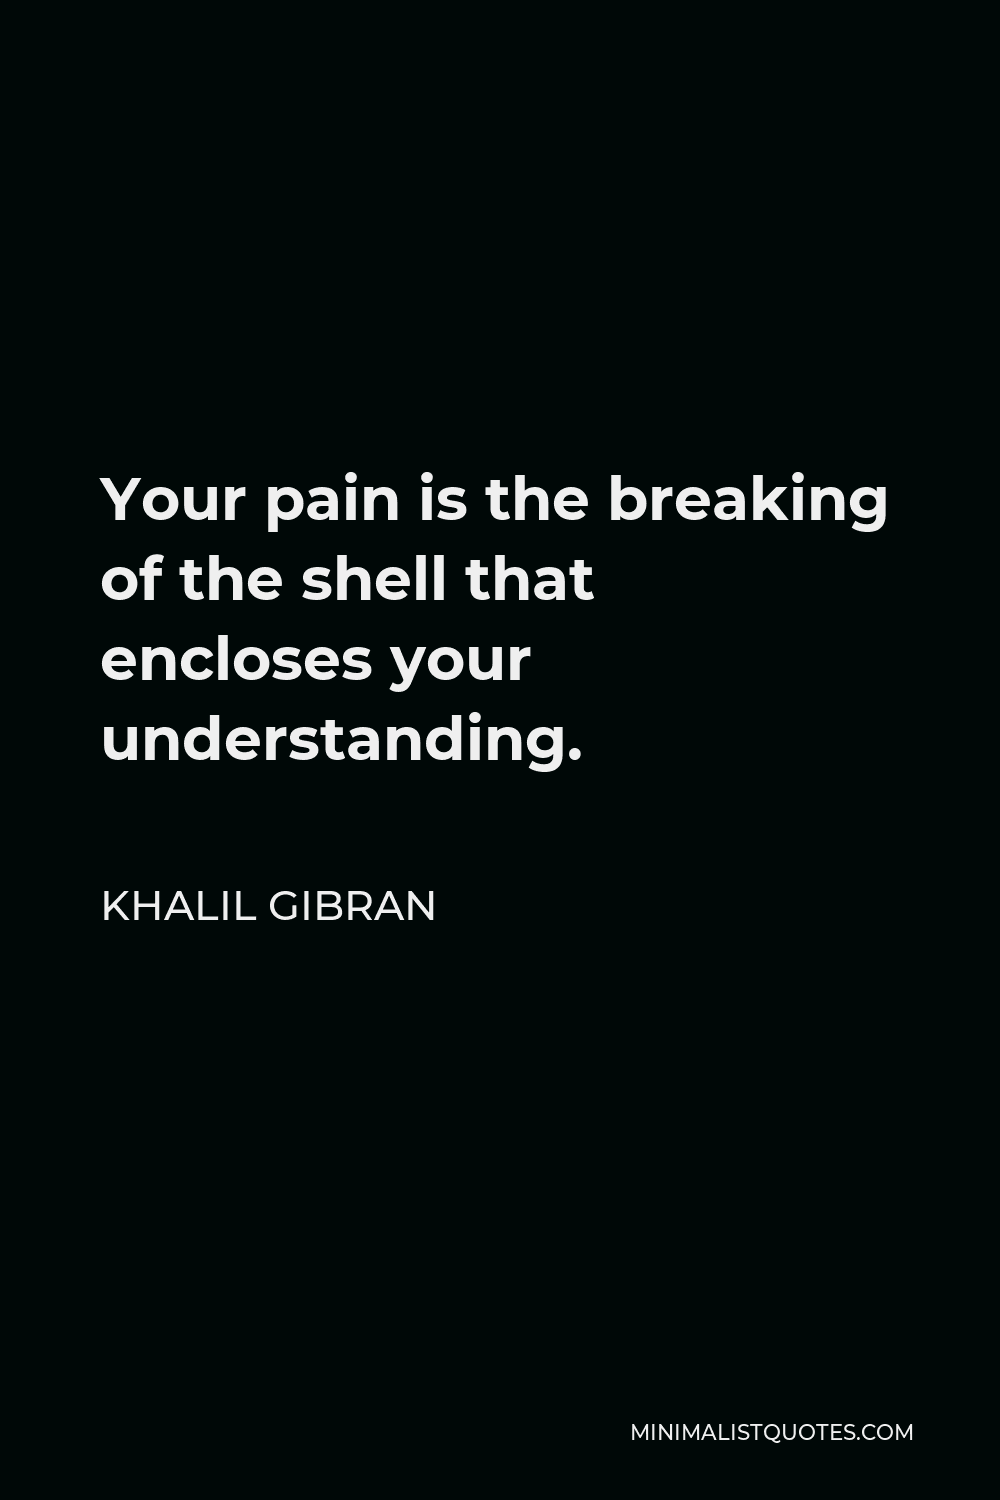 Khalil Gibran Quote - Your pain is the breaking of the shell that encloses your understanding.